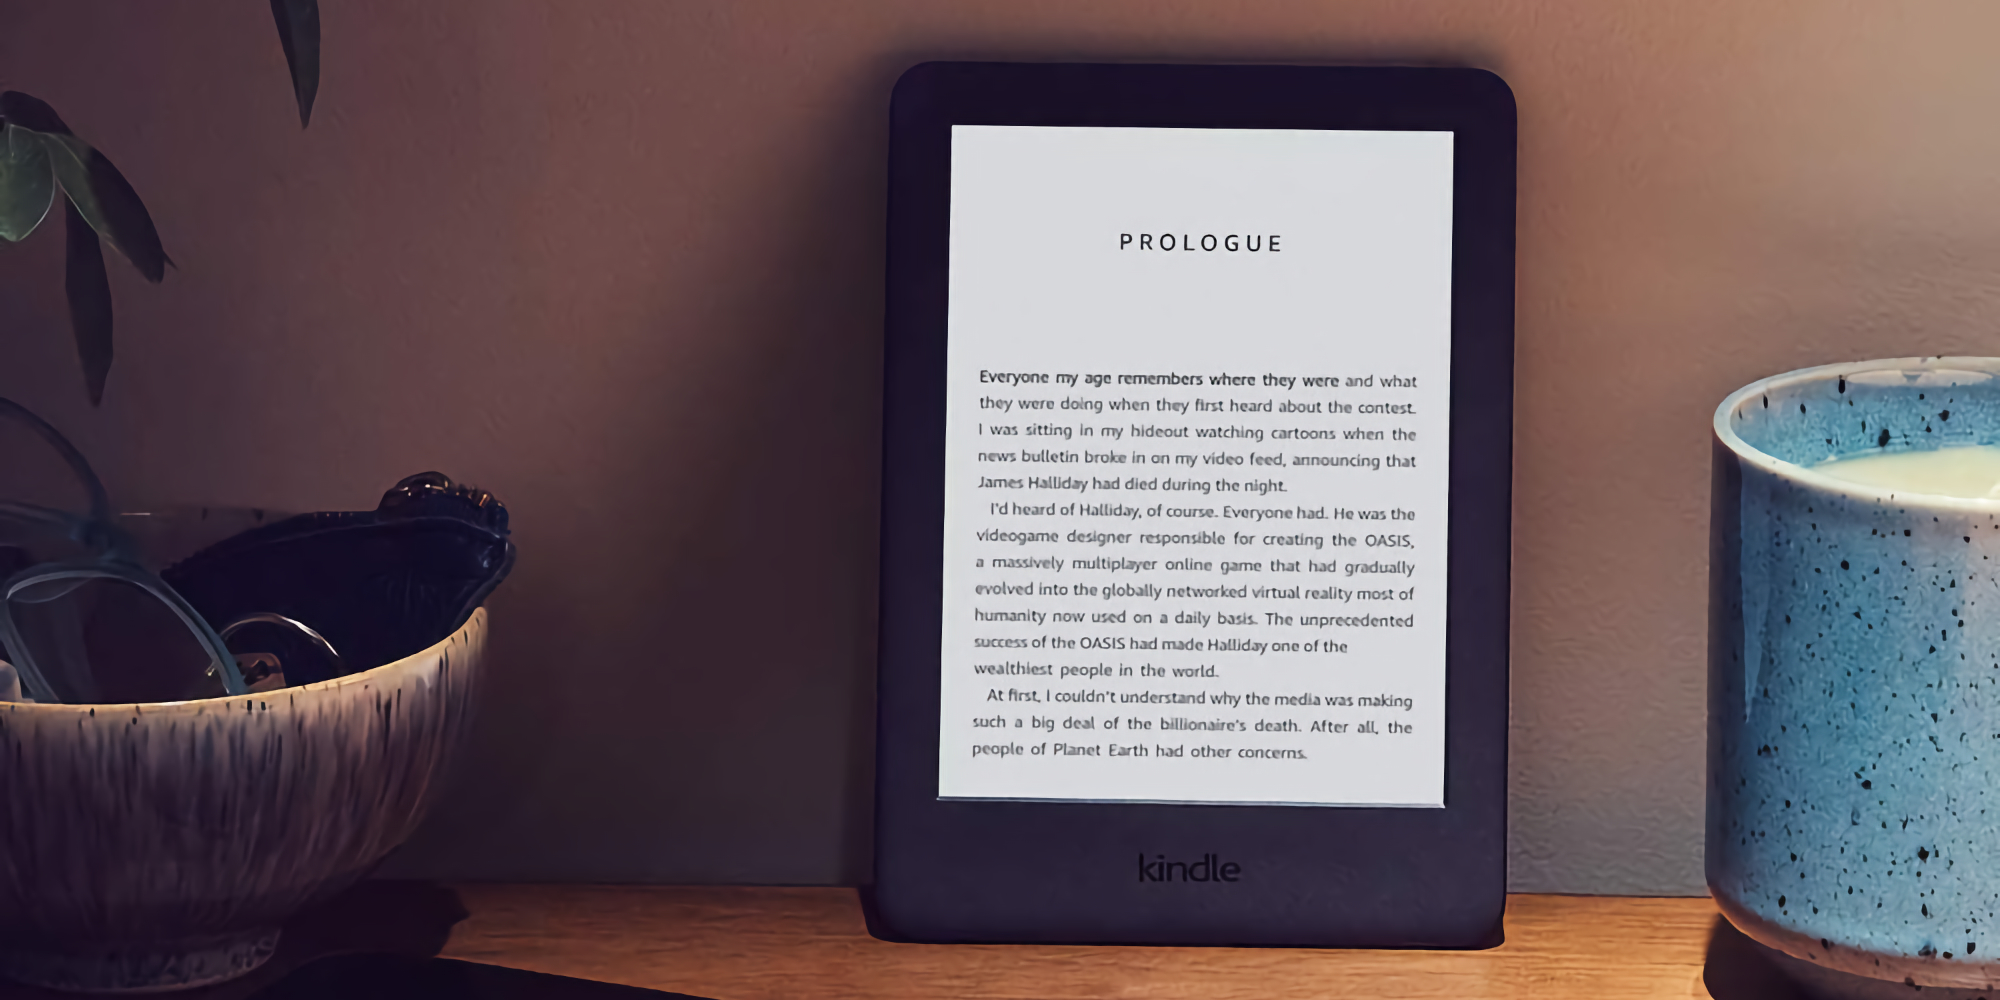 Amazon Kindle buying guide Which Ereader is the right fit? 9to5Toys